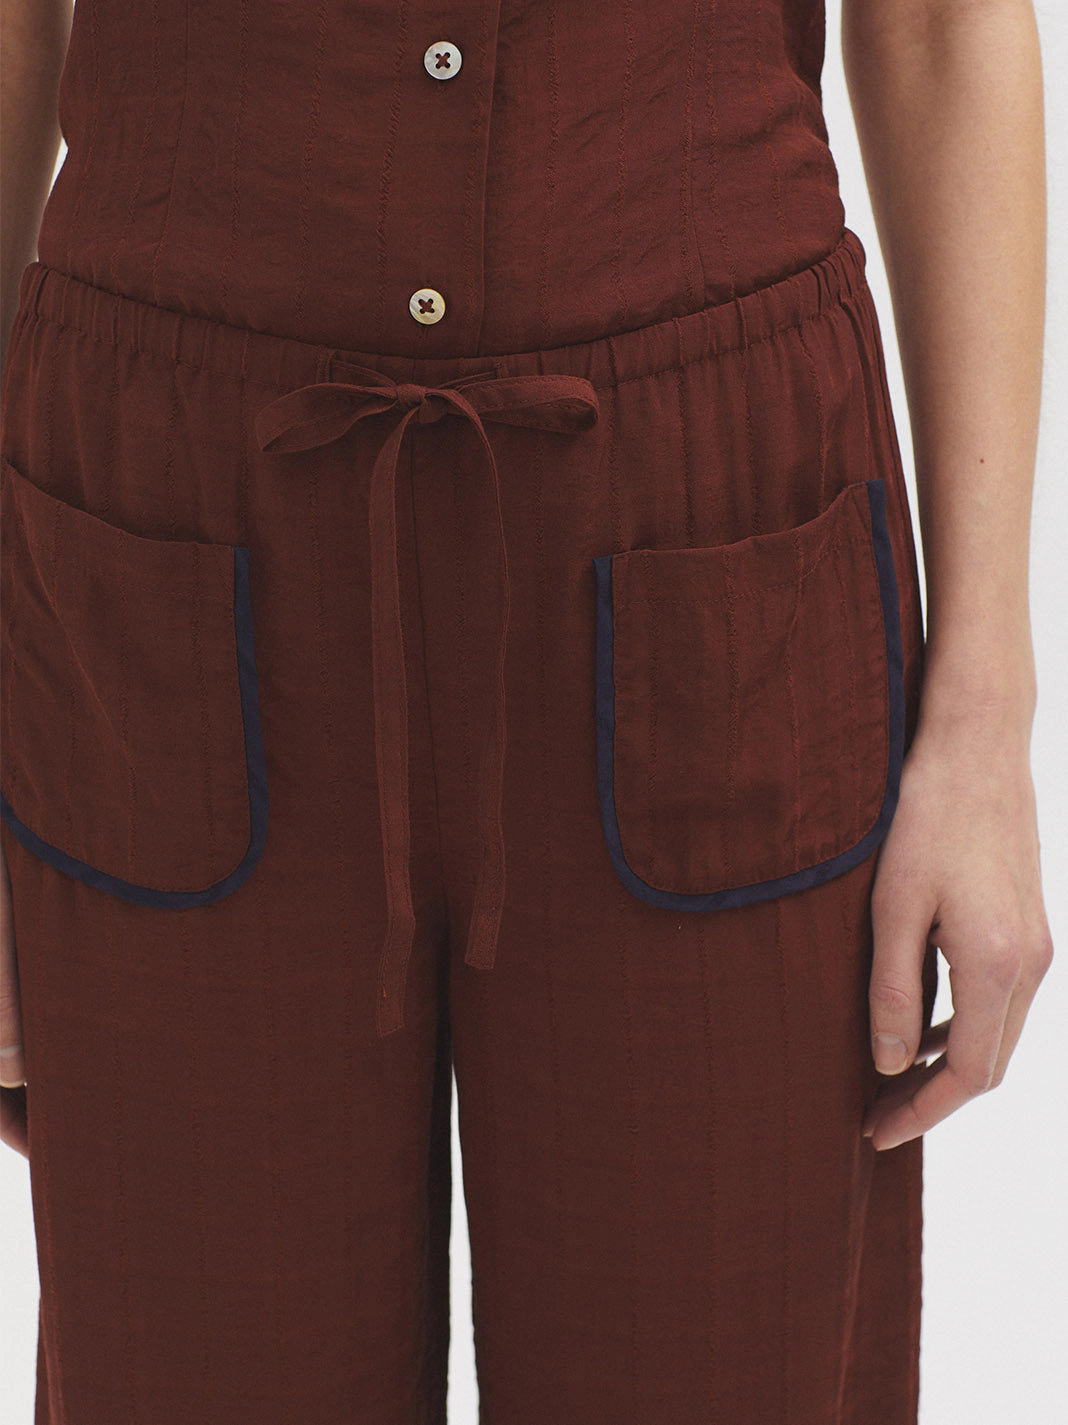 Flowy Pants With Piping Pockets